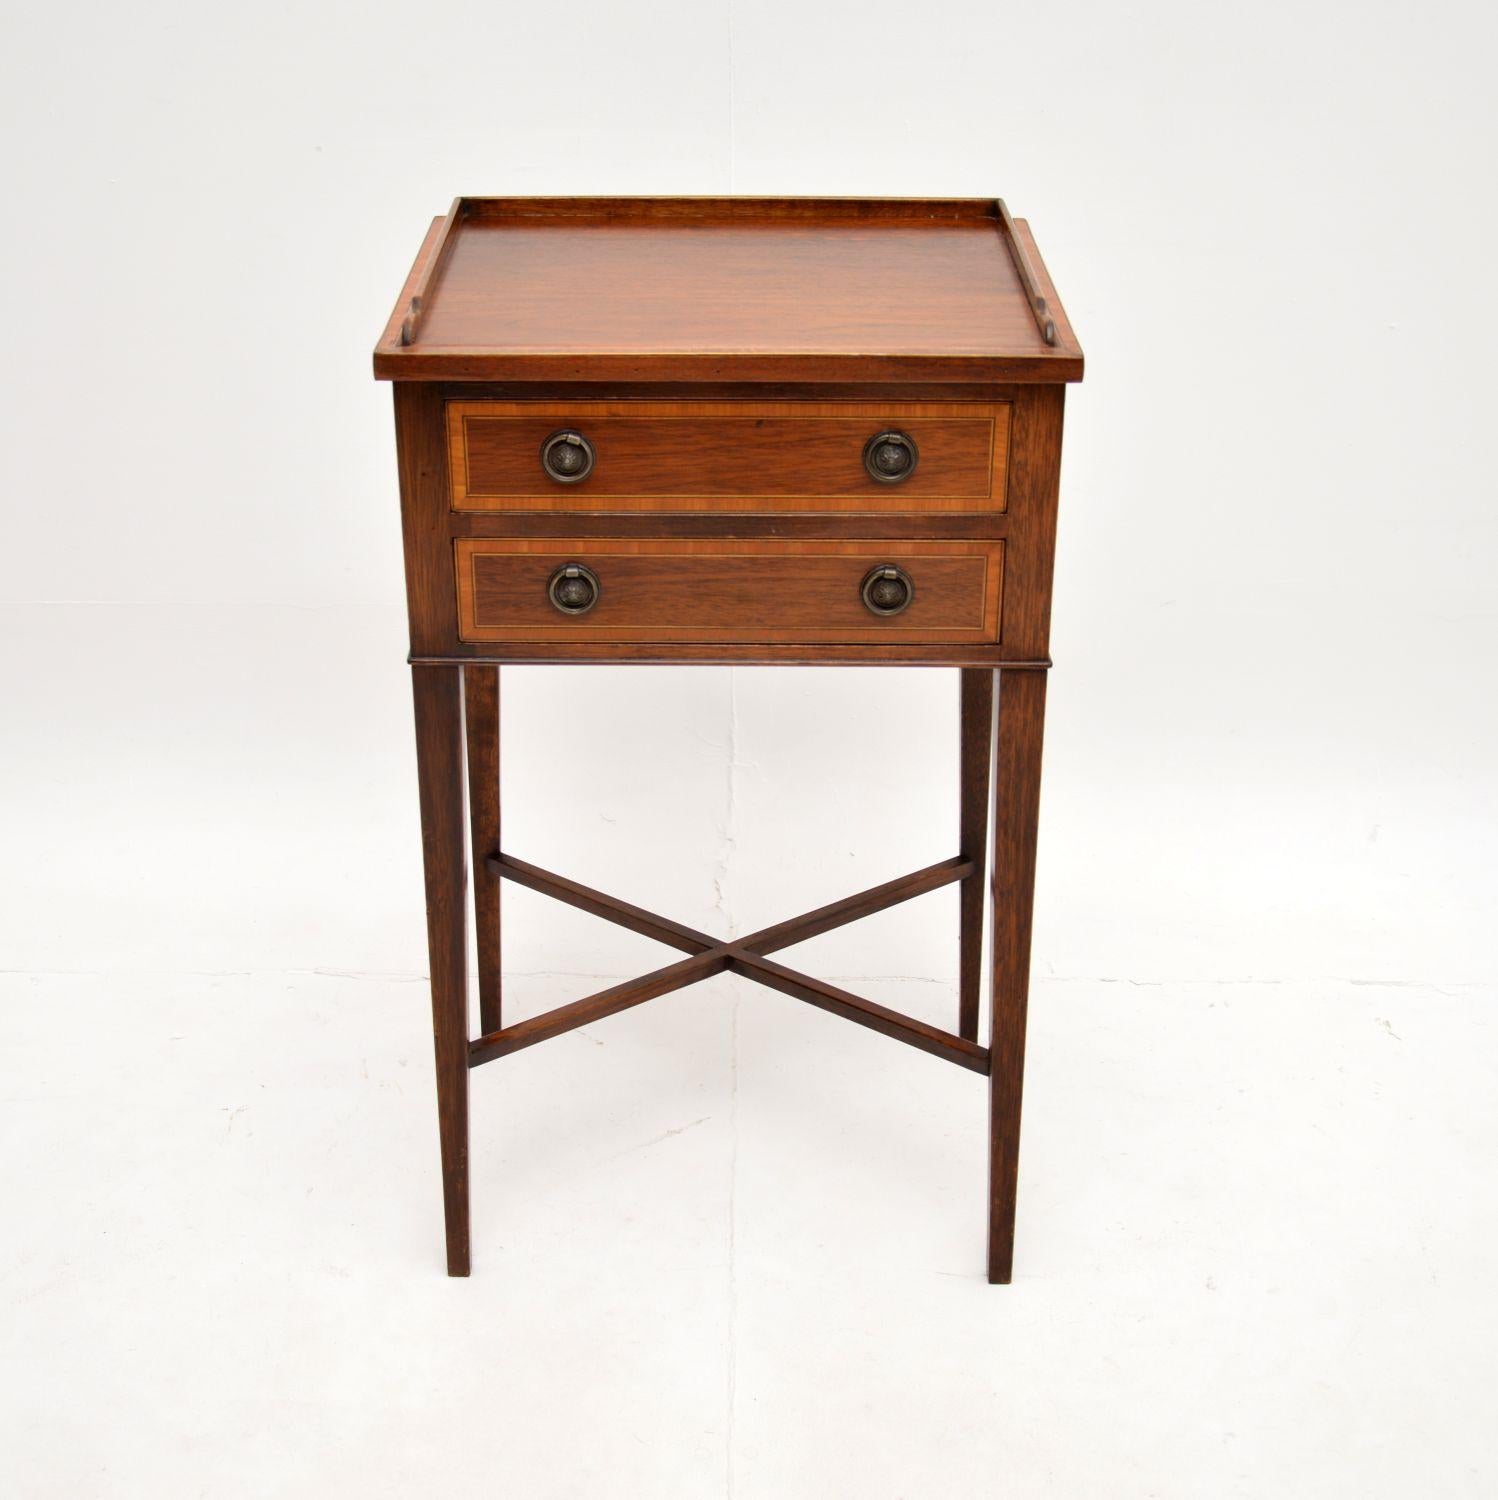 A superb antique Edwardian inlaid side table. This was made in England, it dates from the 1900-1910 period.

It is of lovely quality and is a very useful size, perfect for use as a bedside or occasional side table. This has two drawers with brass